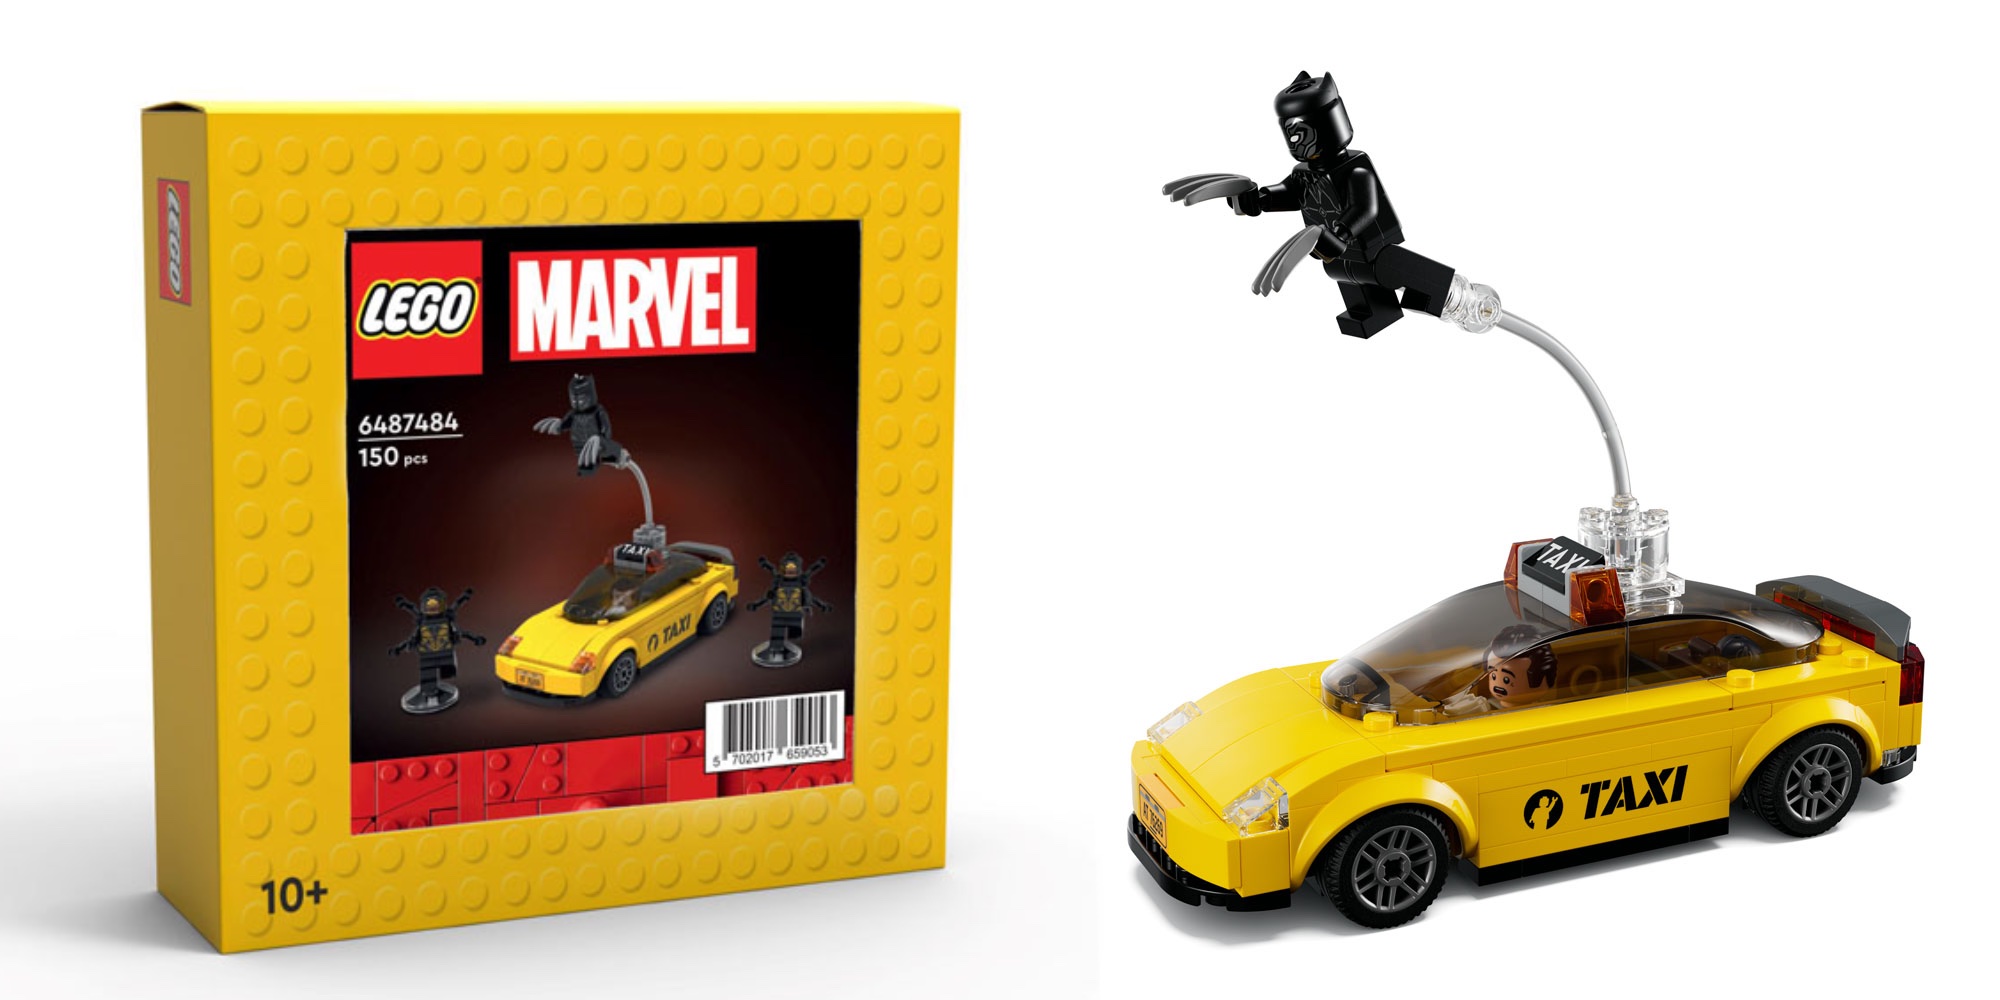 The 27 Best Marvel LEGO Sets of 2023